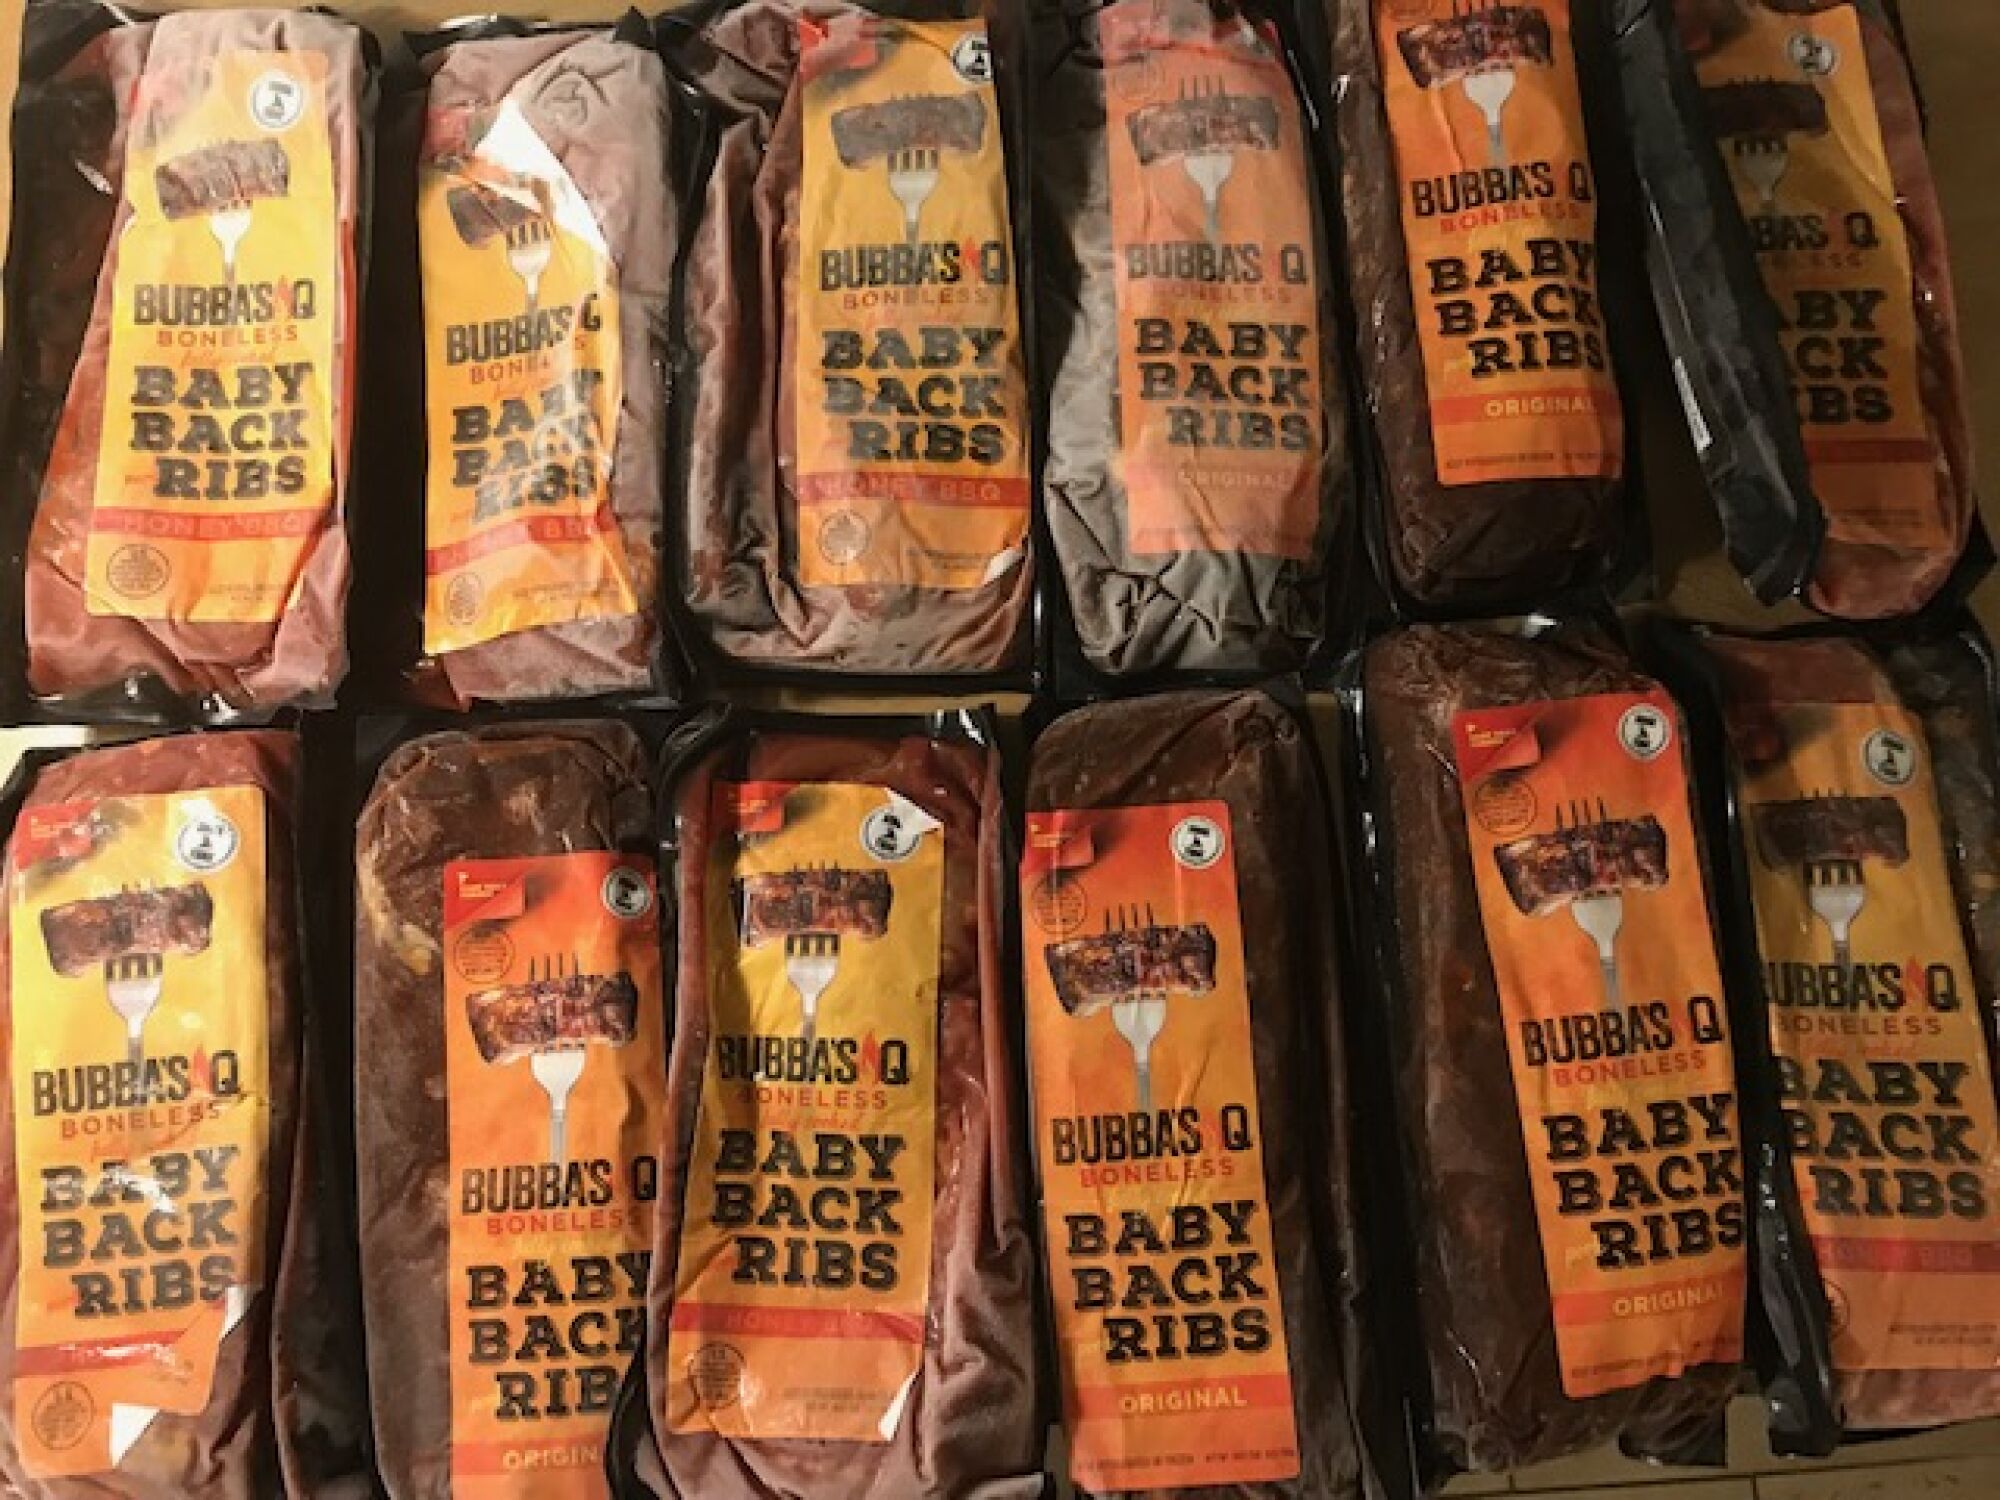 Baker's patented baby back ribs are packaged and on display